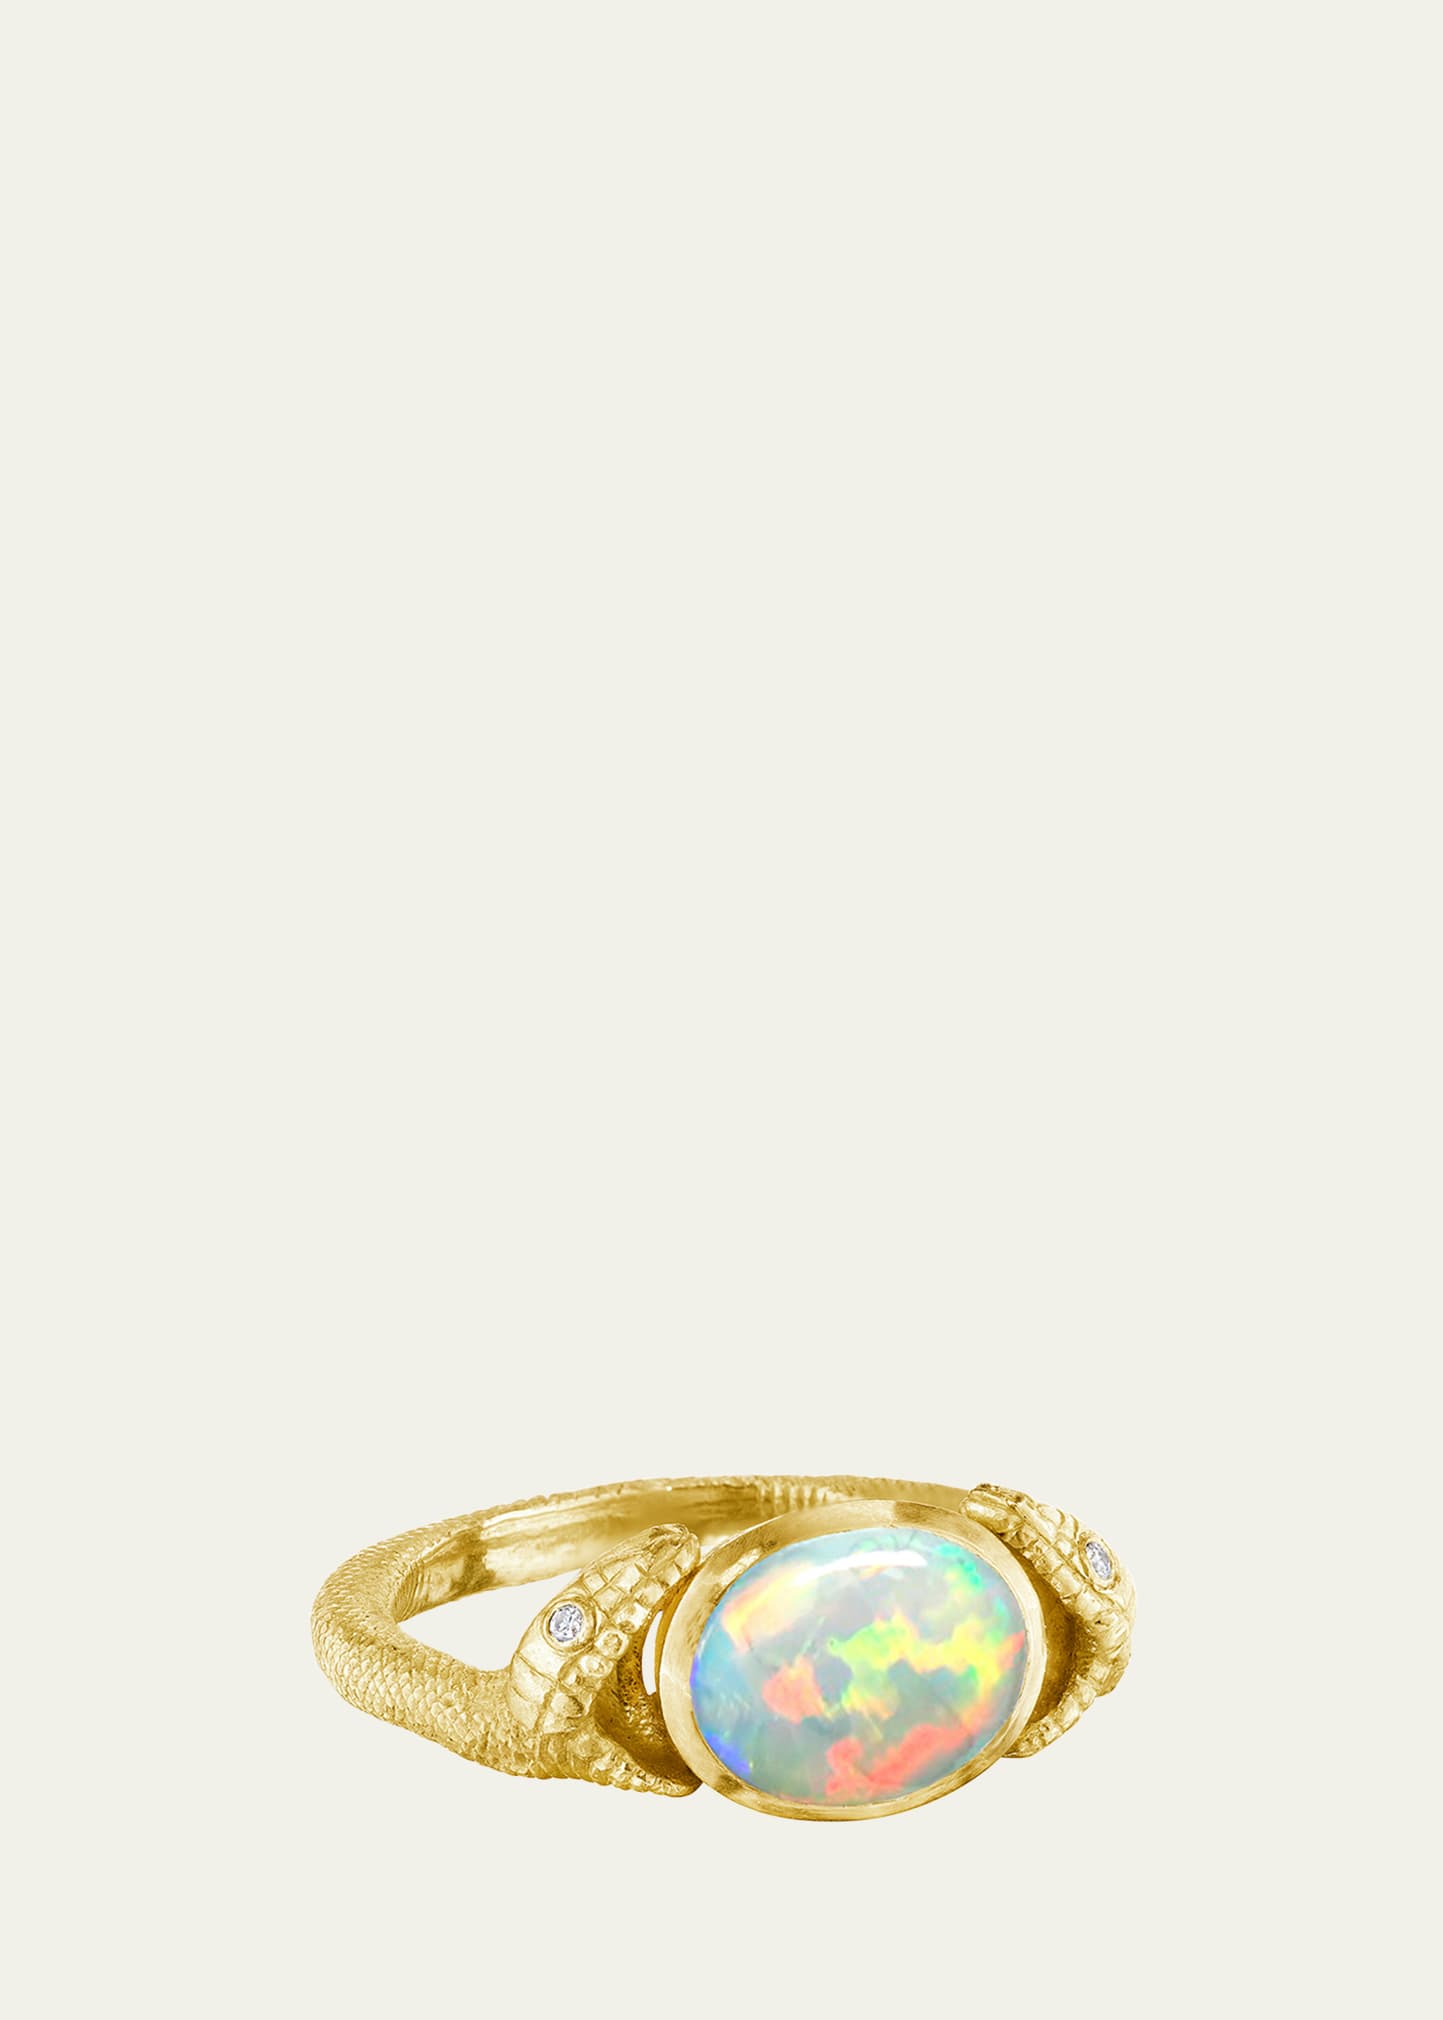 18K Yellow Gold 2 Headed Opal Serpent Ring with Diamonds, Size 6